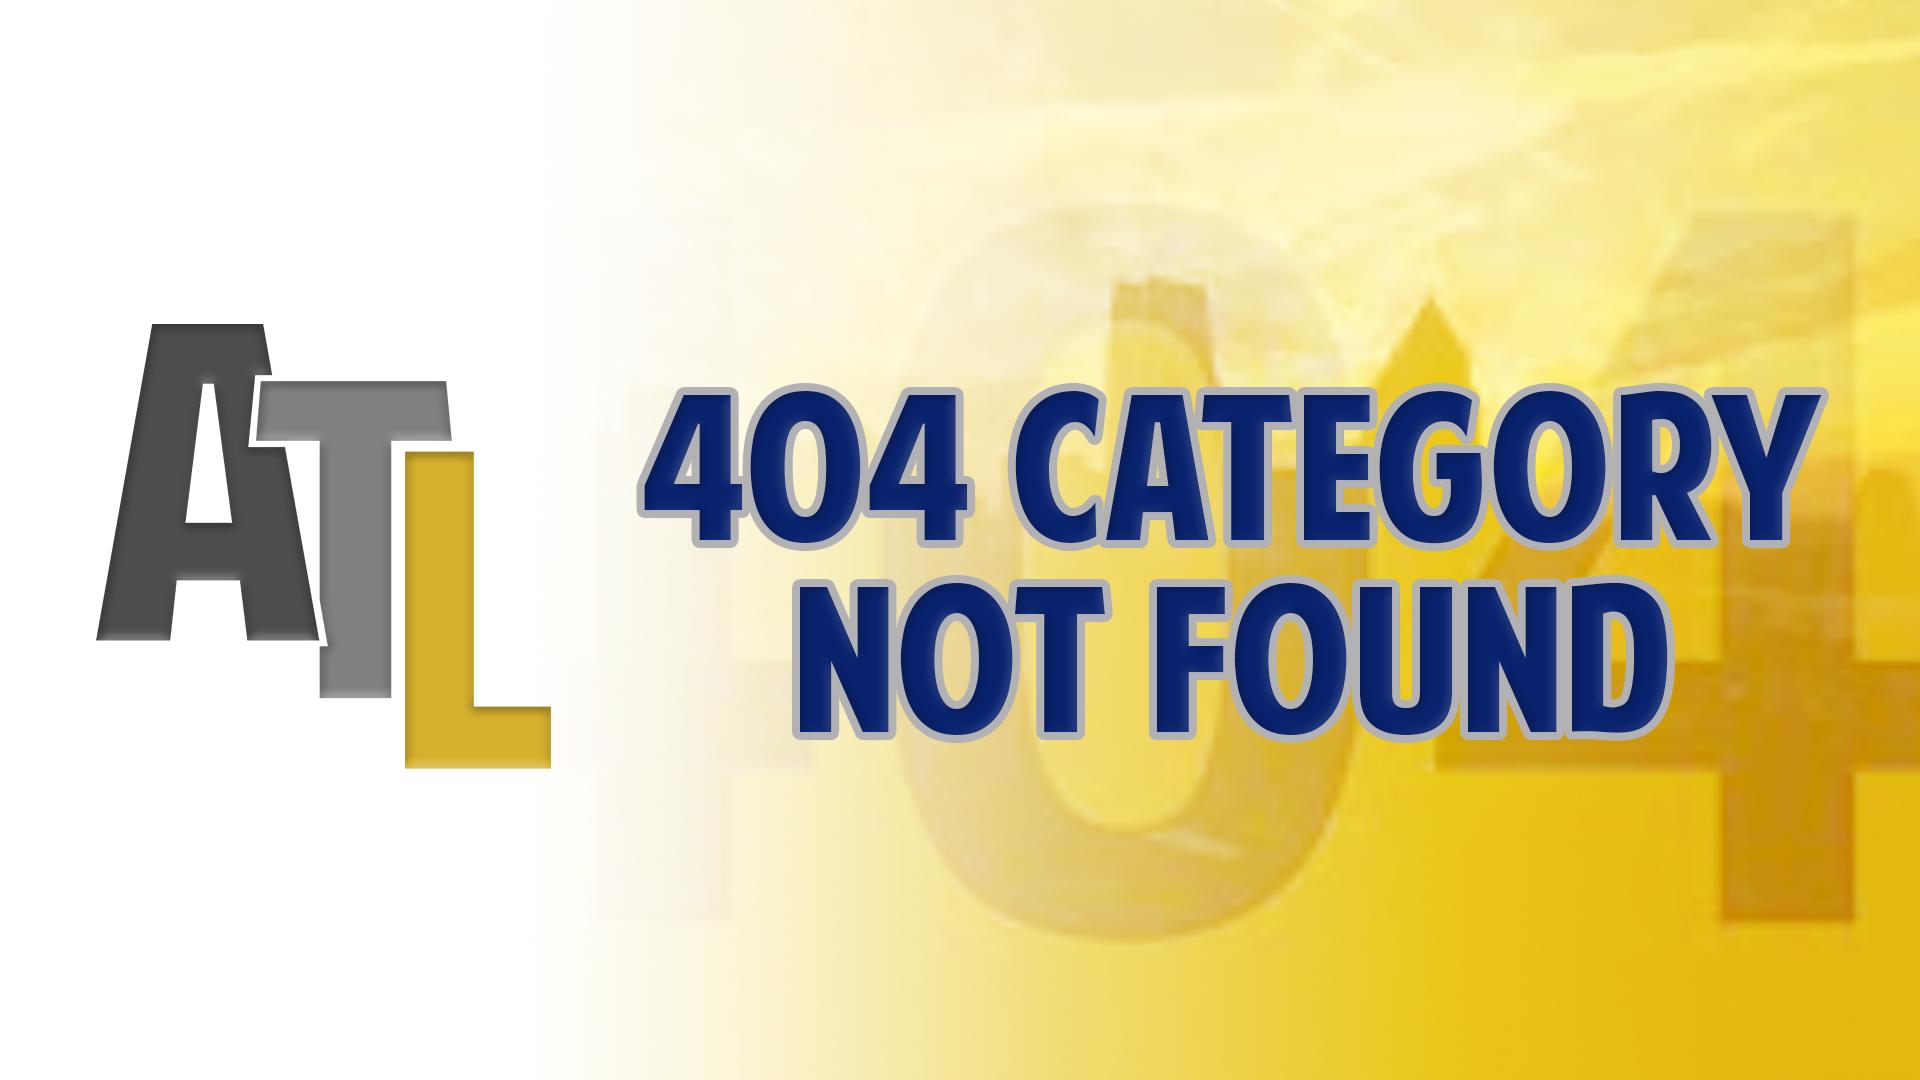 404 - Category Not Found